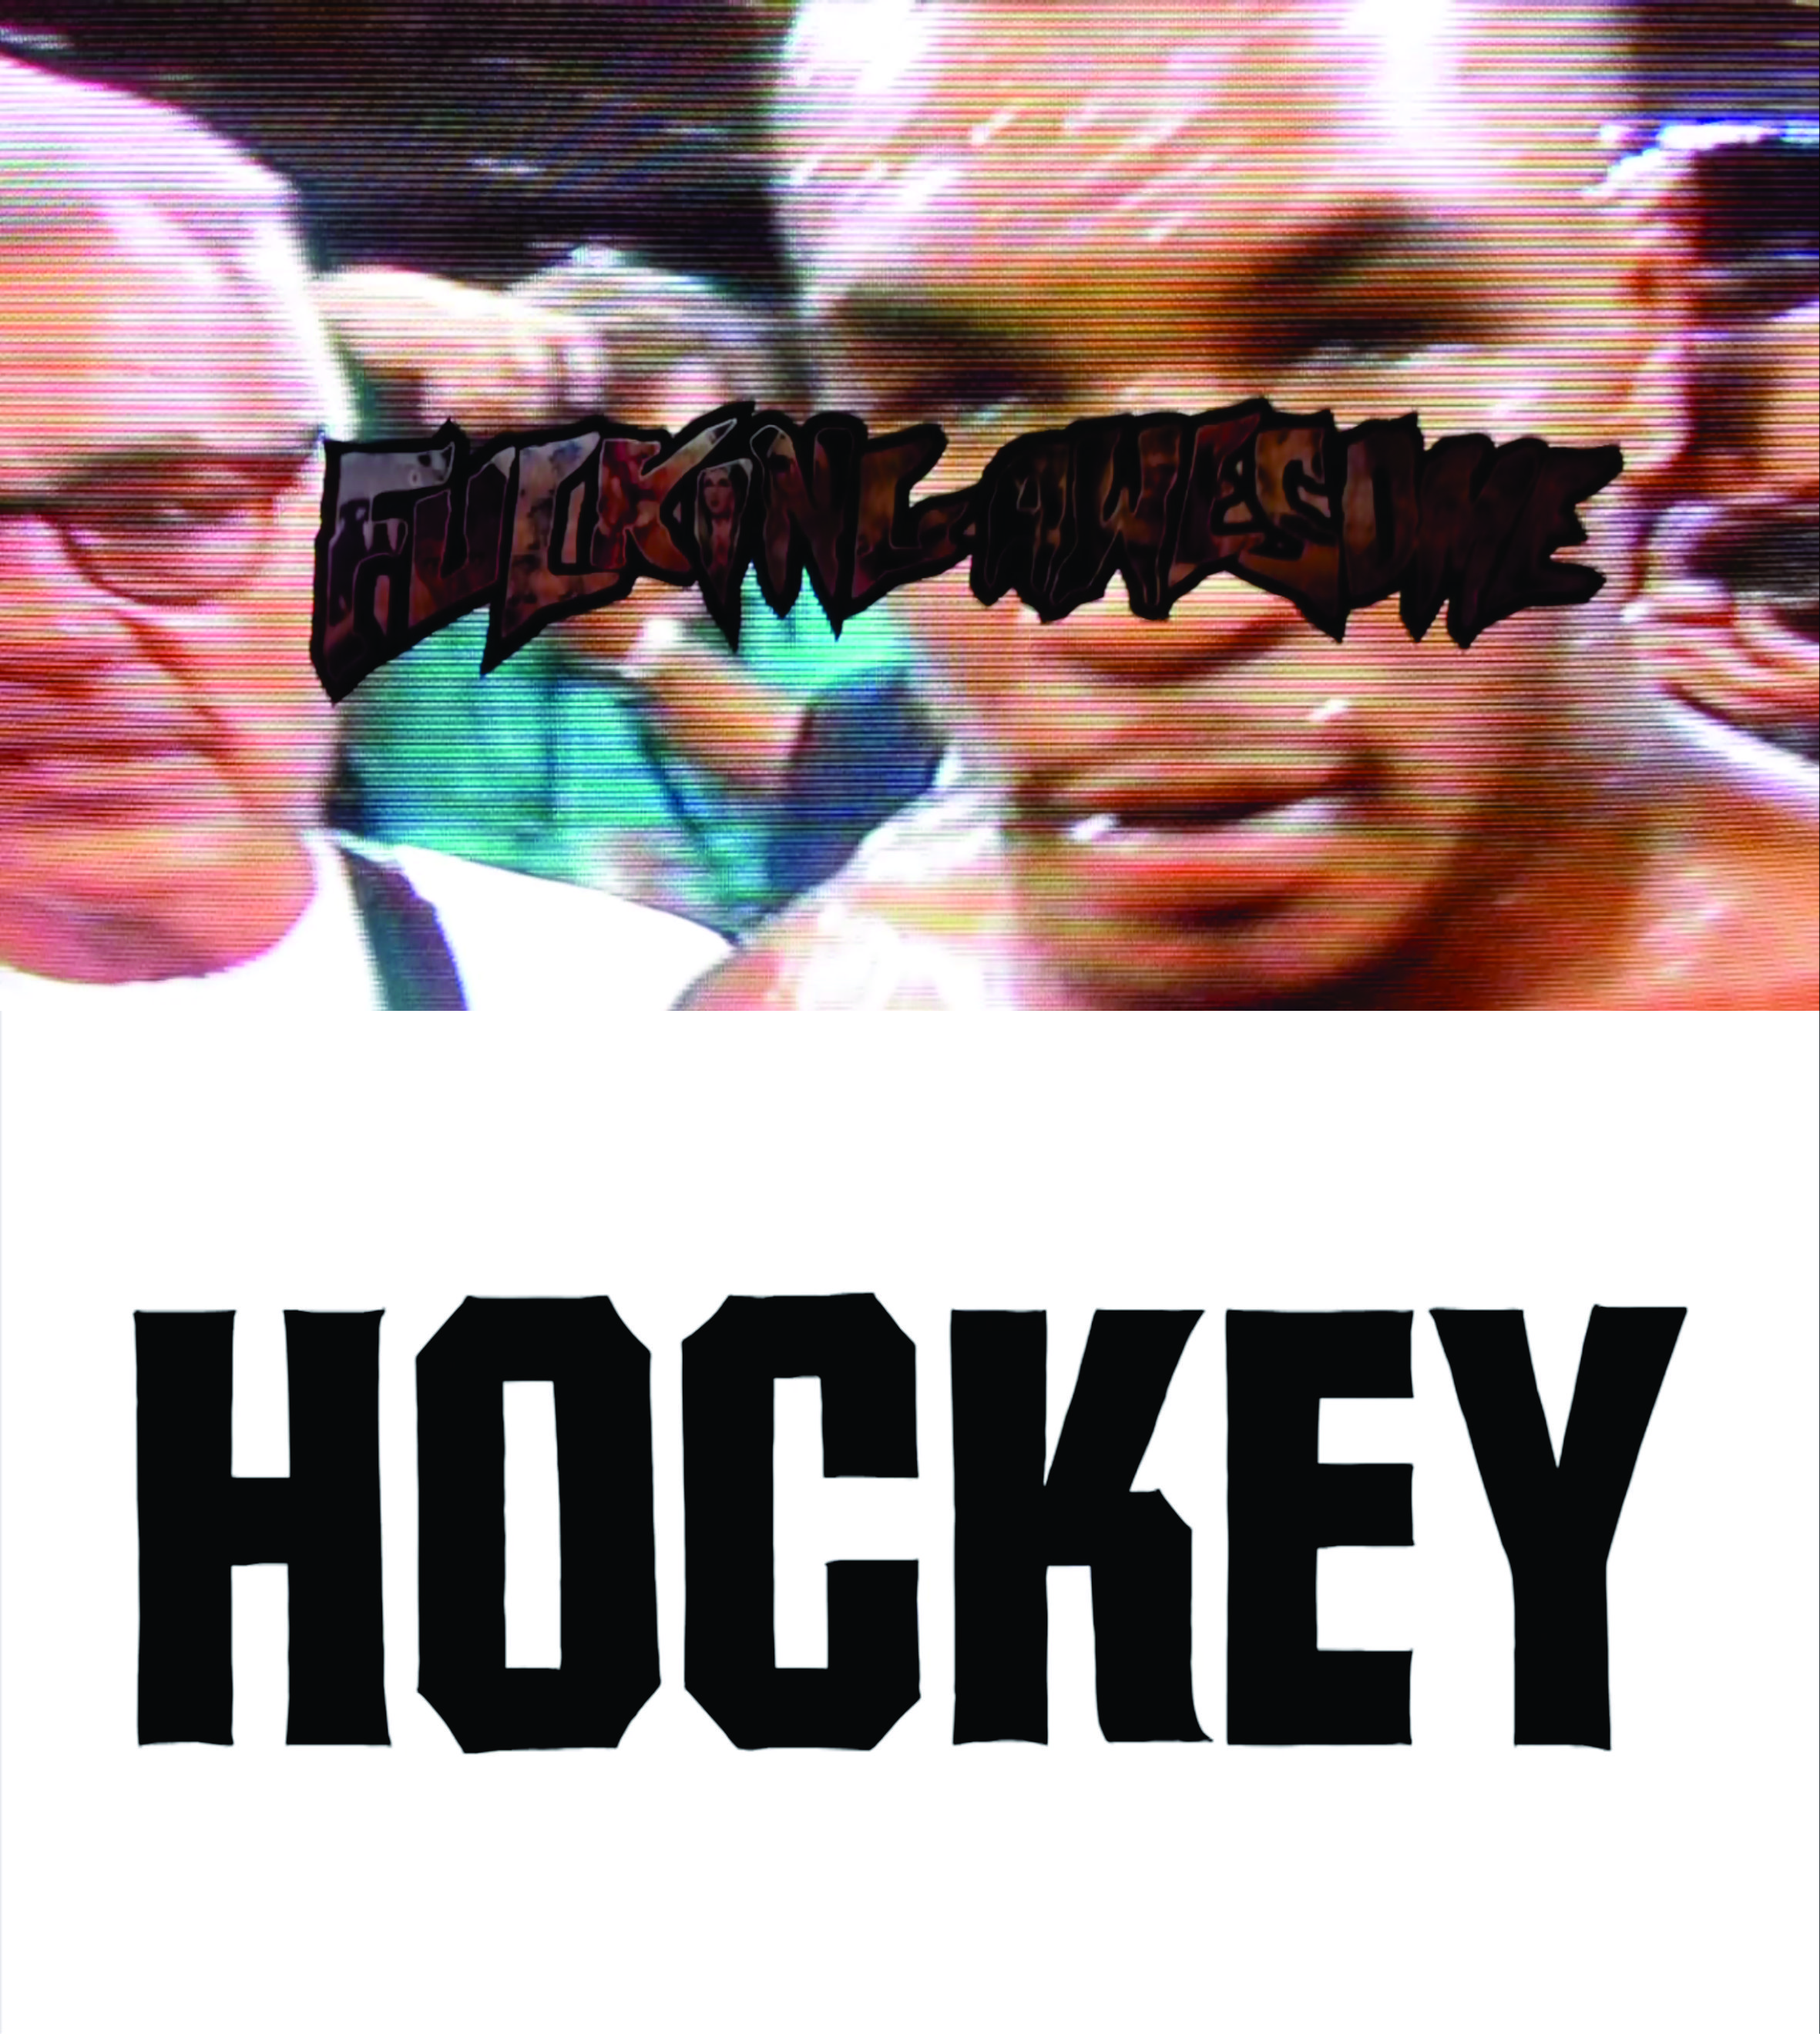 Fucking Awesome / HOCKEY - FIGHT / FUCK cover